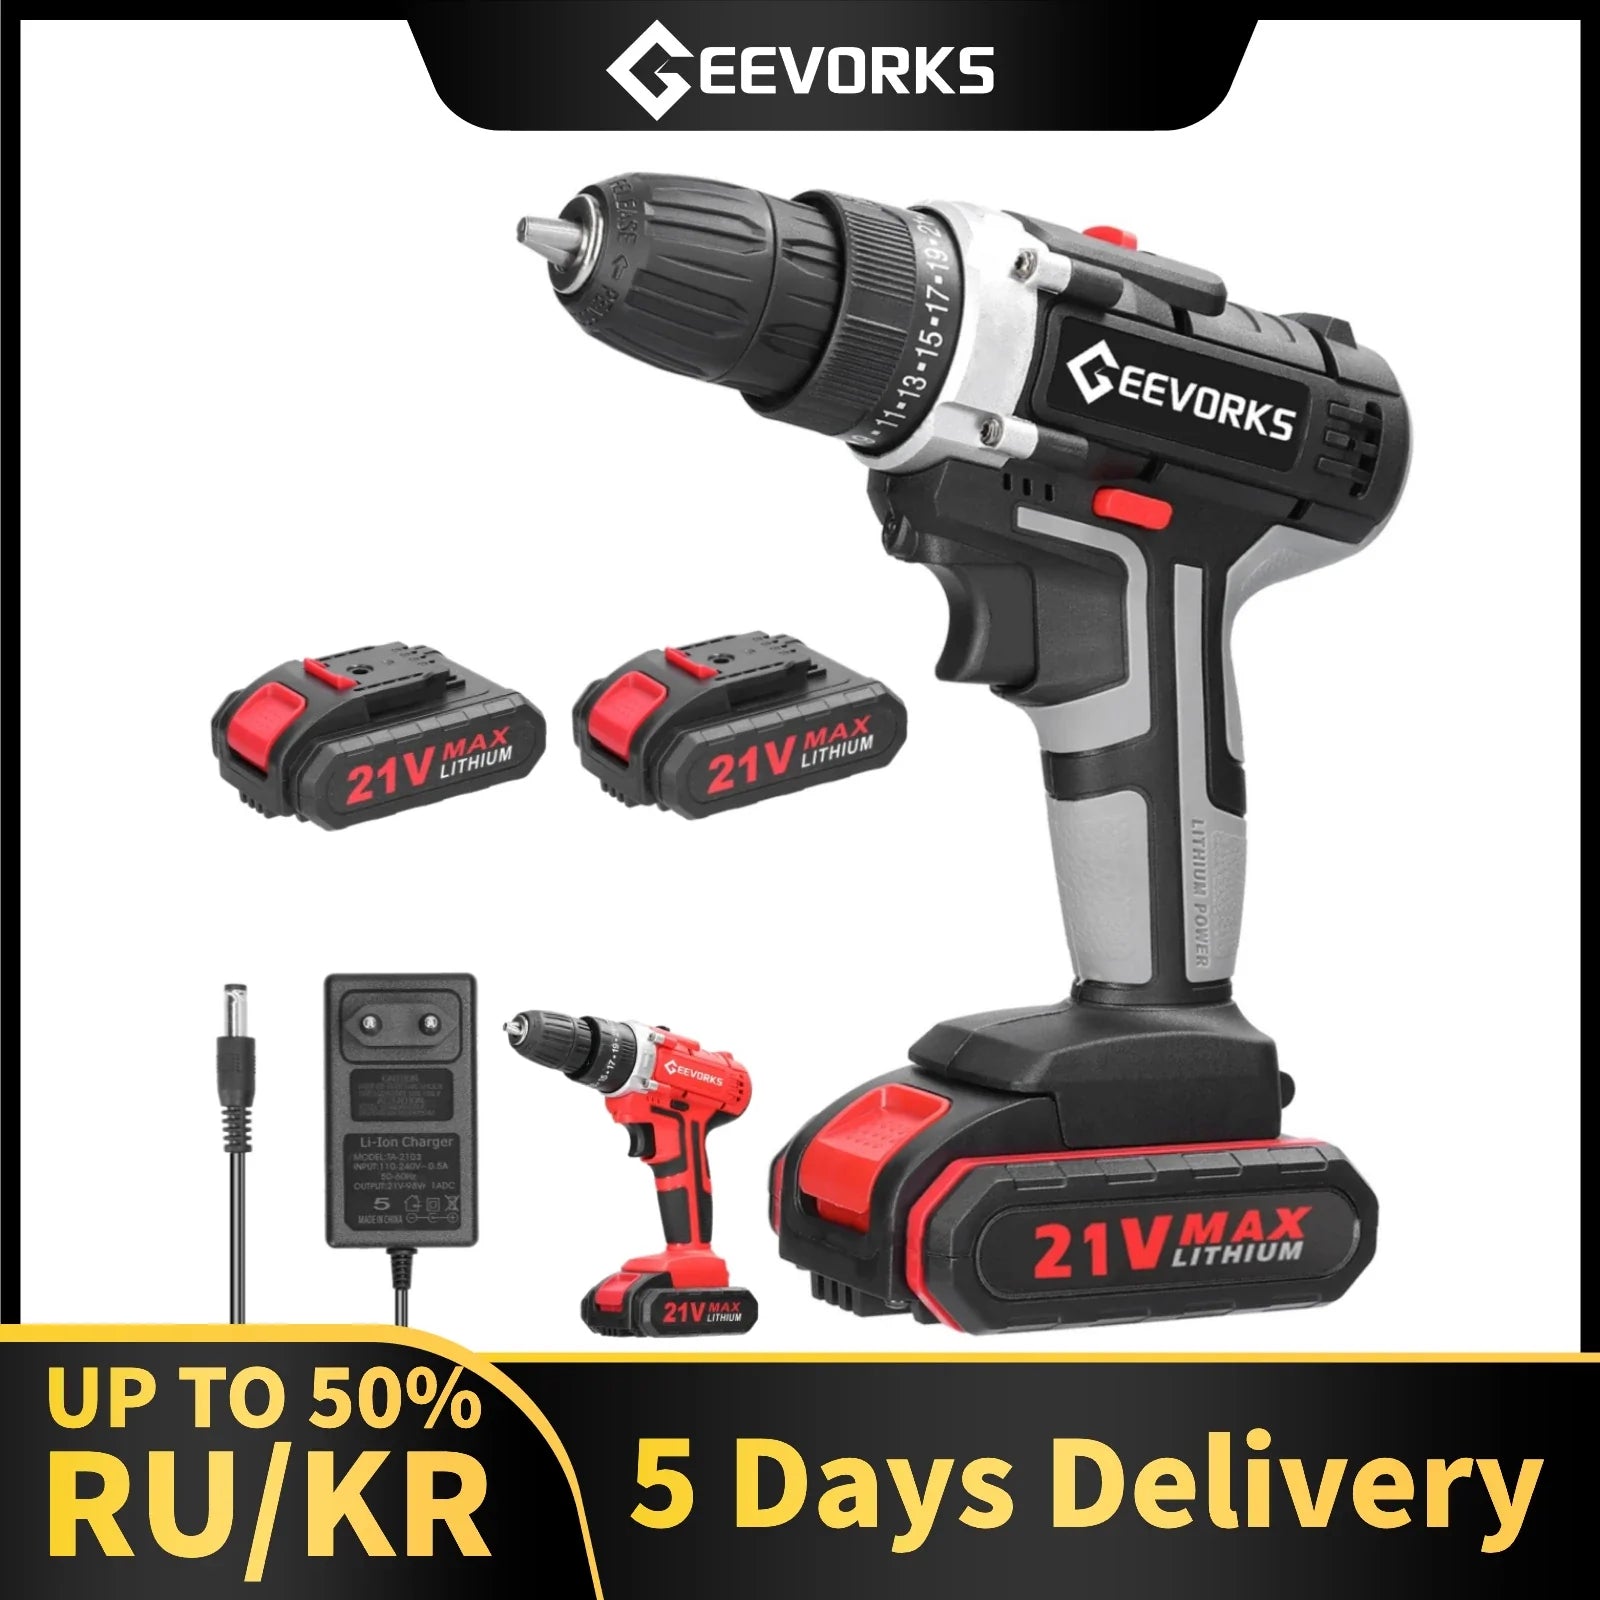 21V Cordless Electric Screwdriver Impact Drill 3-In-1 Electric Drill For Wallworking/Woodworking Power Tools Hammer Drill  ourlum.com   